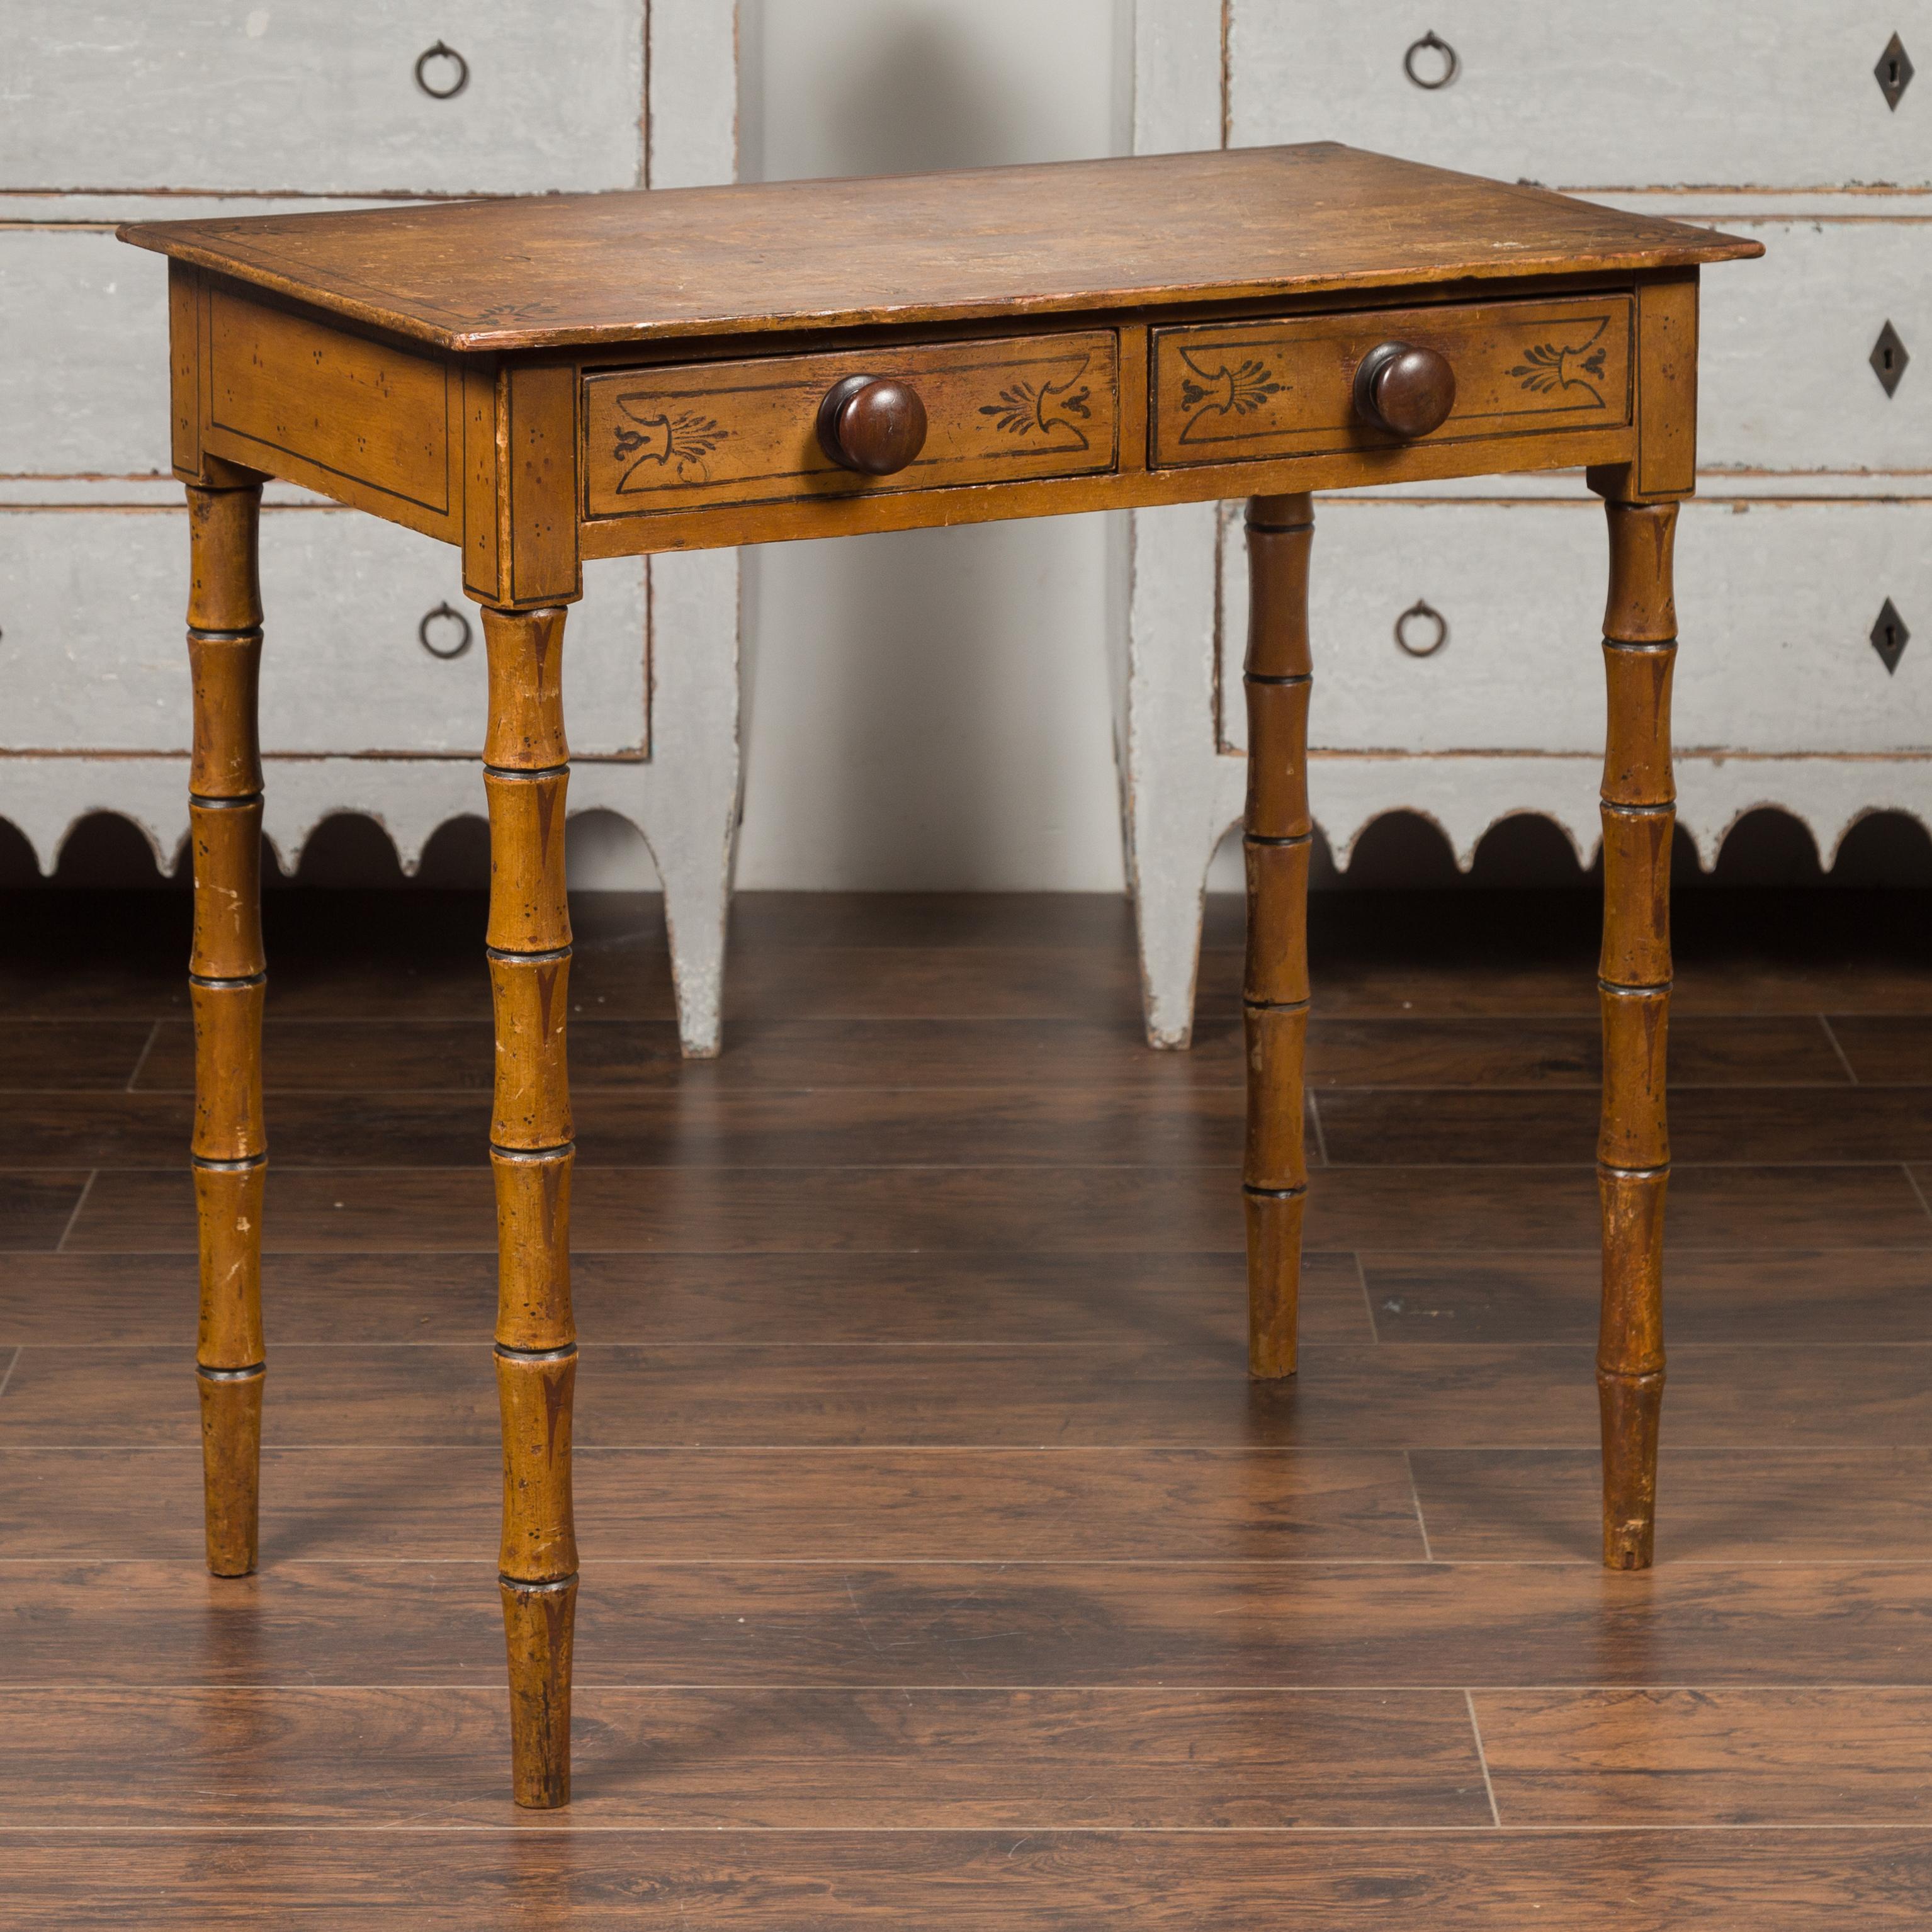 An English painted table from the late 19th century, with two drawers and faux bamboo legs. Born in England during the later years of the 19th century, this table features a rectangular top with distressed appearance, sitting above two drawers each